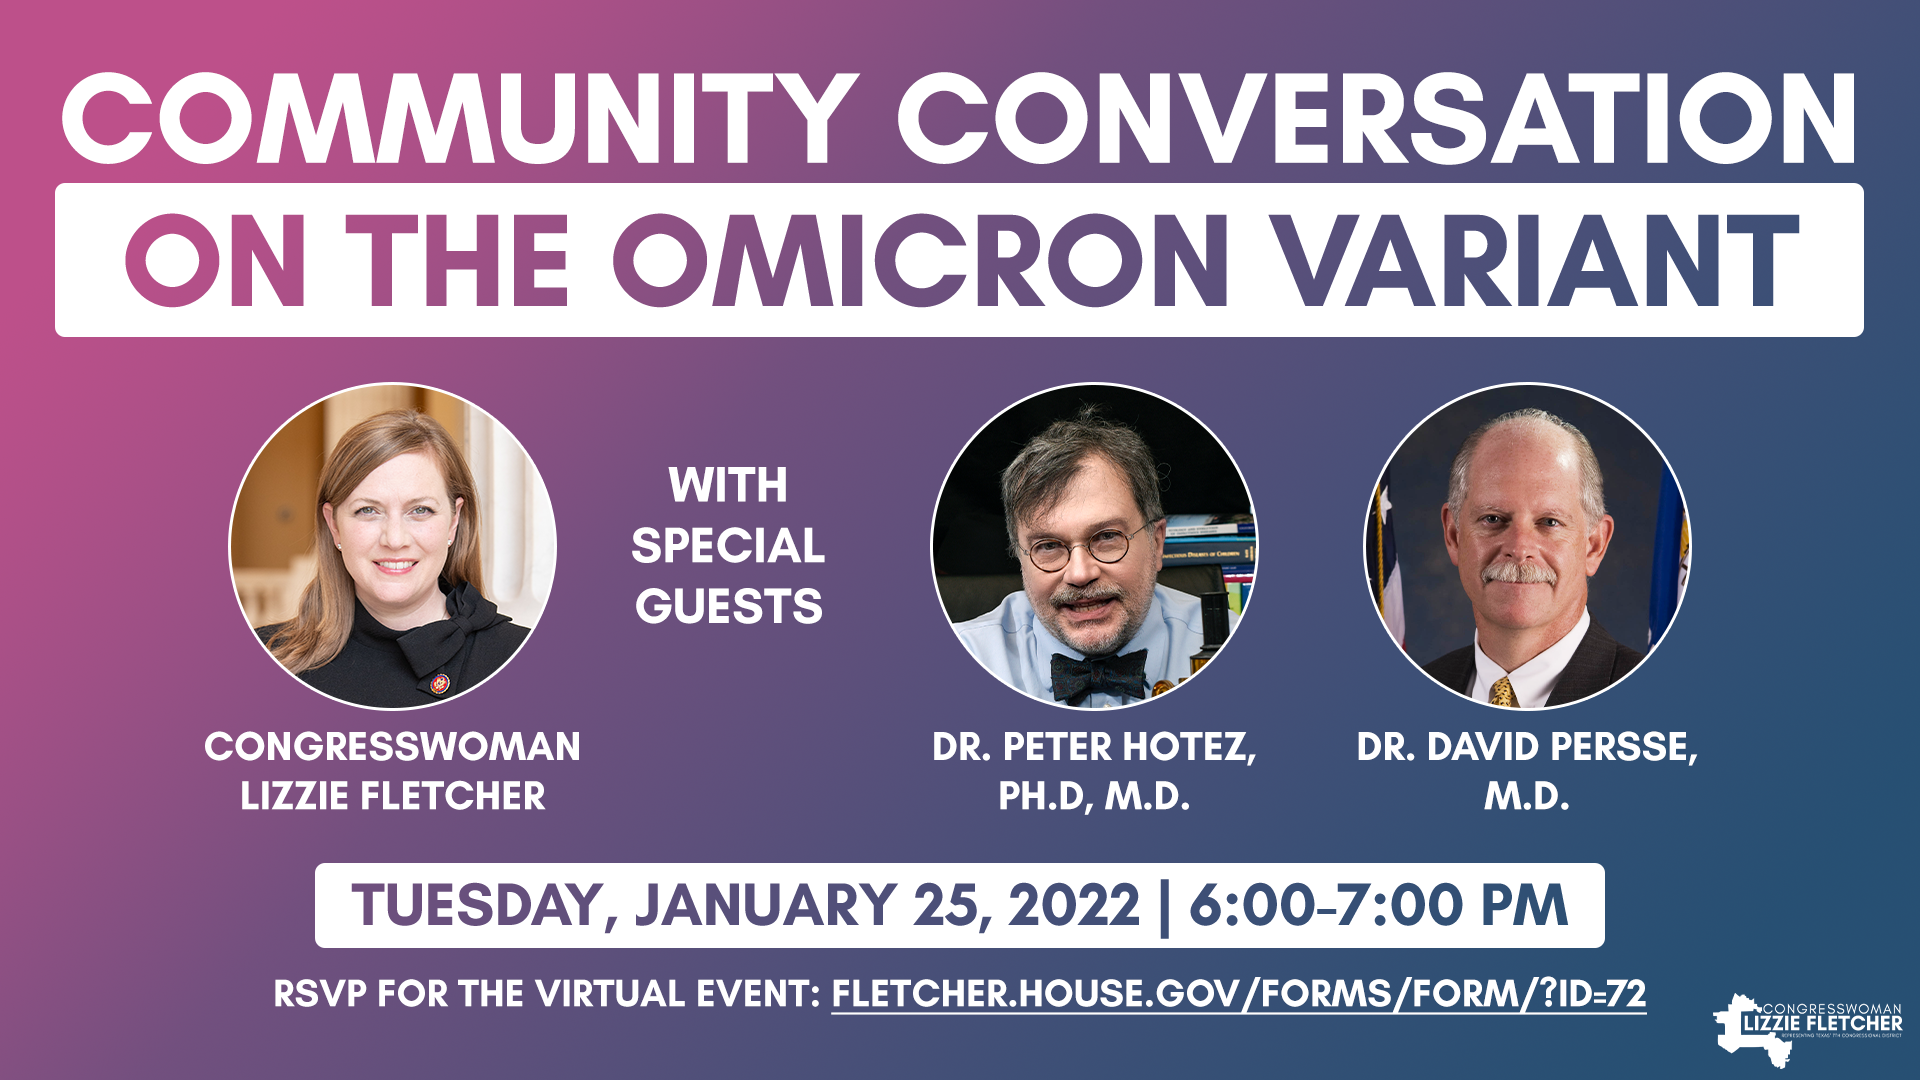 Community Conversation on the Omicron Variant, hosted by Congresswoman Lizzie Fletcher with Dr. Peter Hotez and Dr. David Persse. Tuesday, January 25, 2022, 6:00PM-7:00PM. RSVP for the virtual event: fletcher.house.gov/forms/form/?ID=72